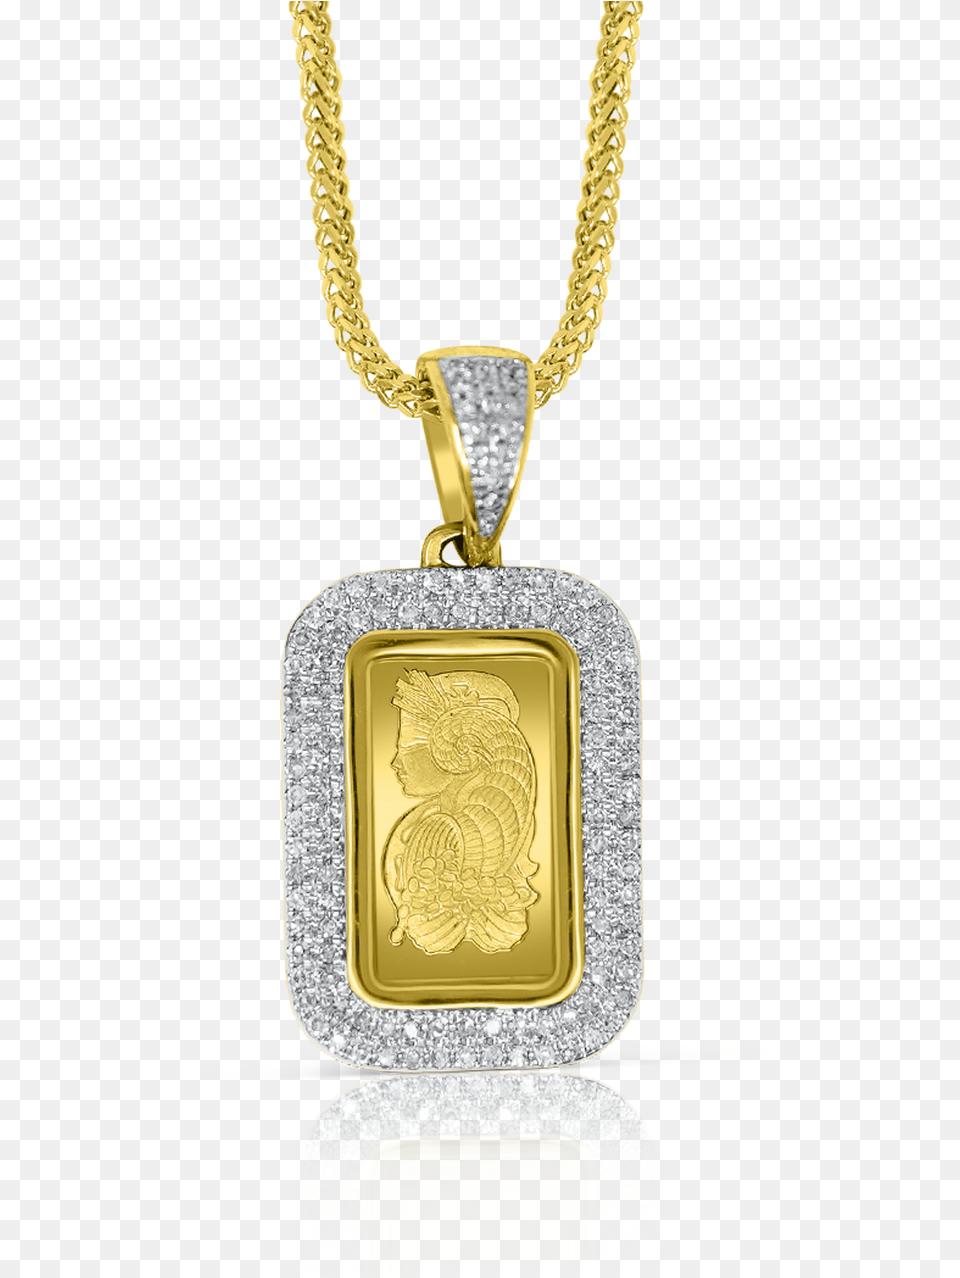 Gold Pamp Suisse Bar Pendant 033ct With Chain Locket, Accessories, Jewelry, Necklace Free Transparent Png